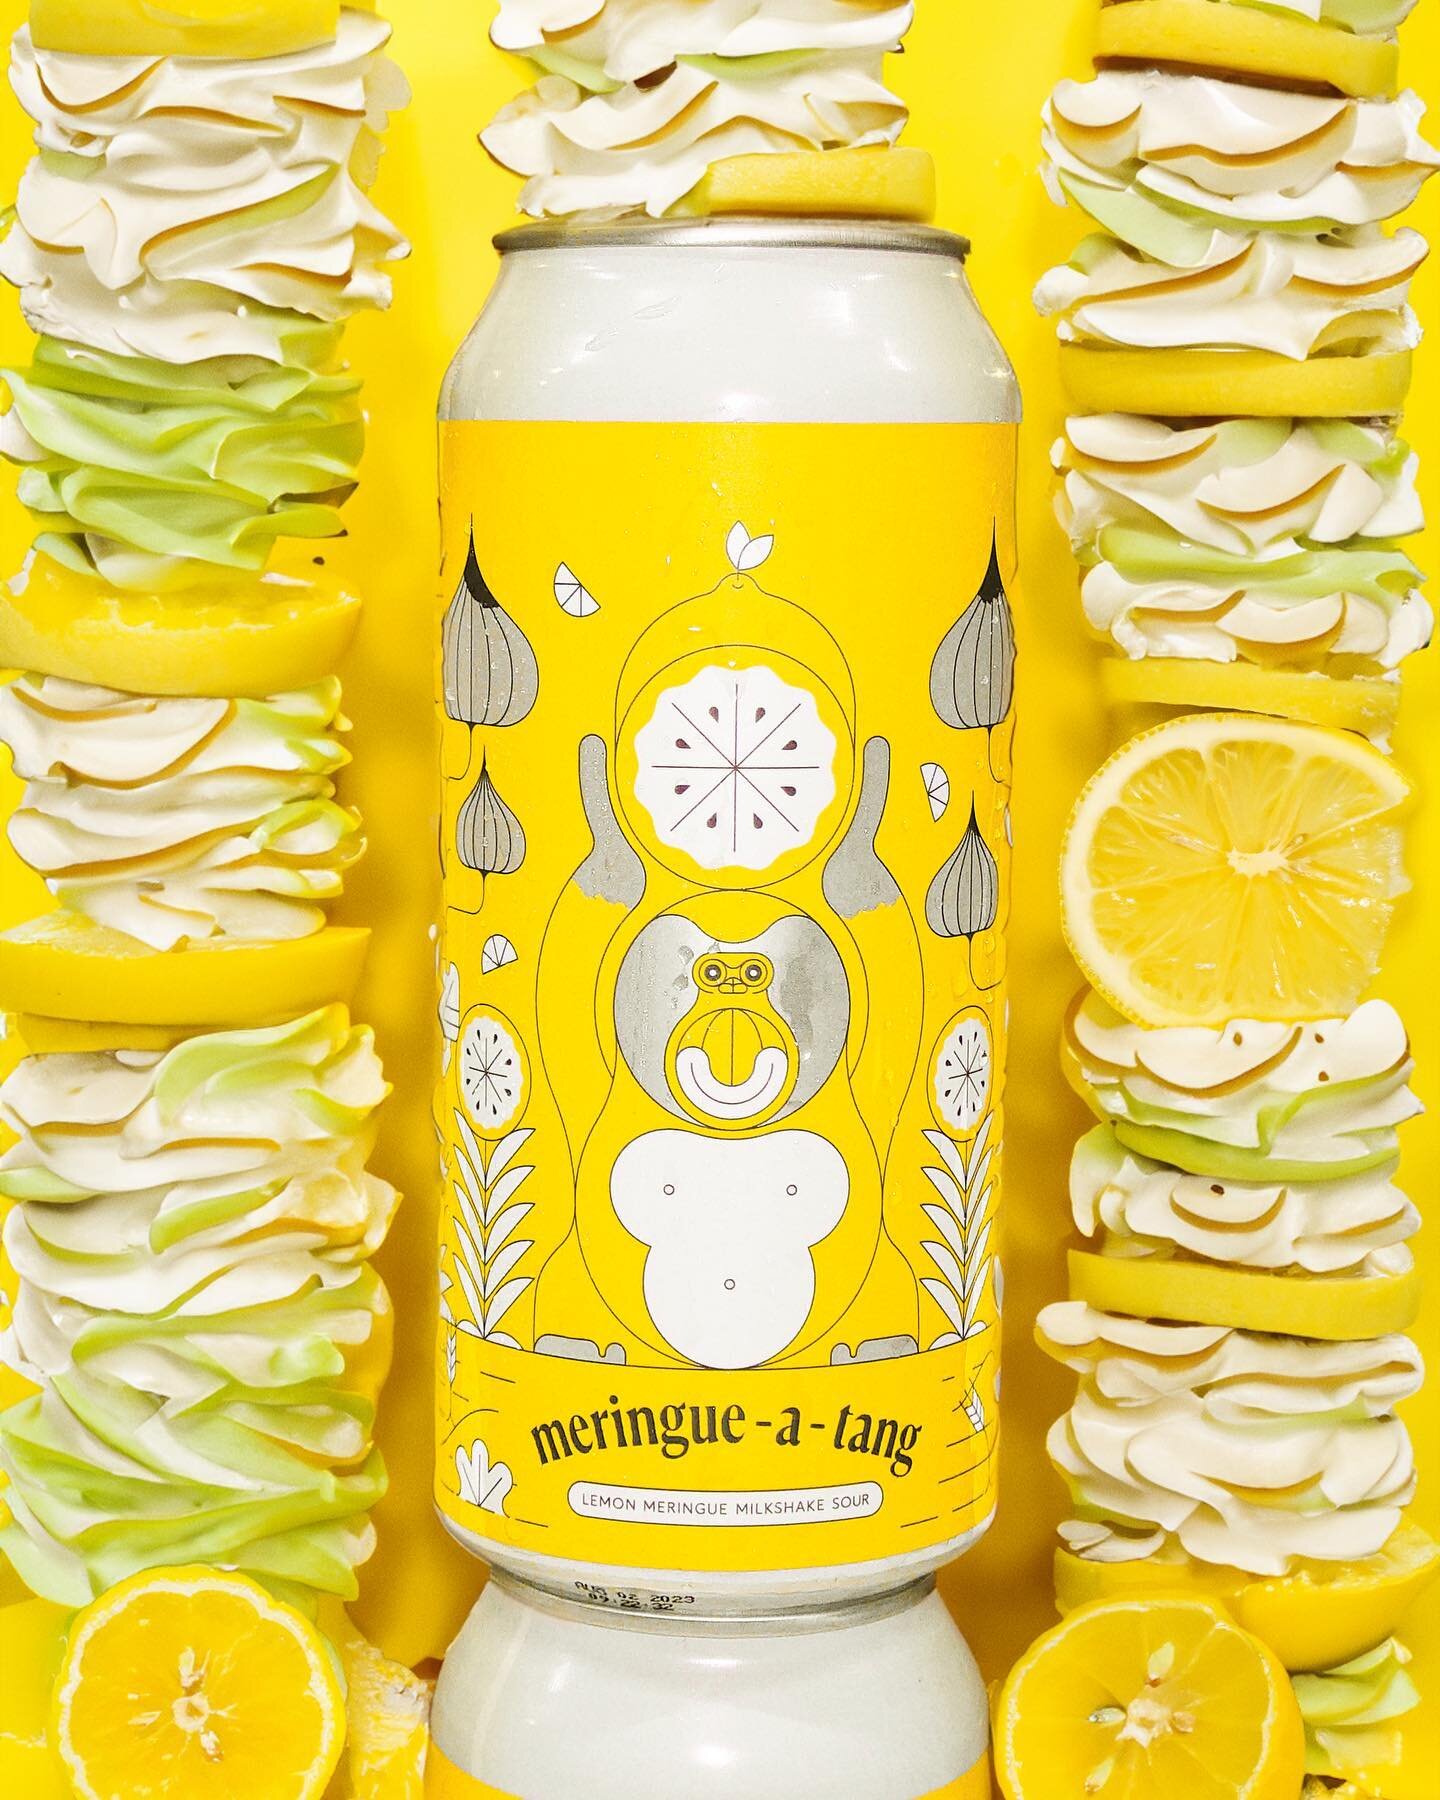 LEMON MERINGUE MILKSHAKE SOUR!

Meringue-a-tang is back baybee! Available for pick up at @nonsuchbeer's taproom.